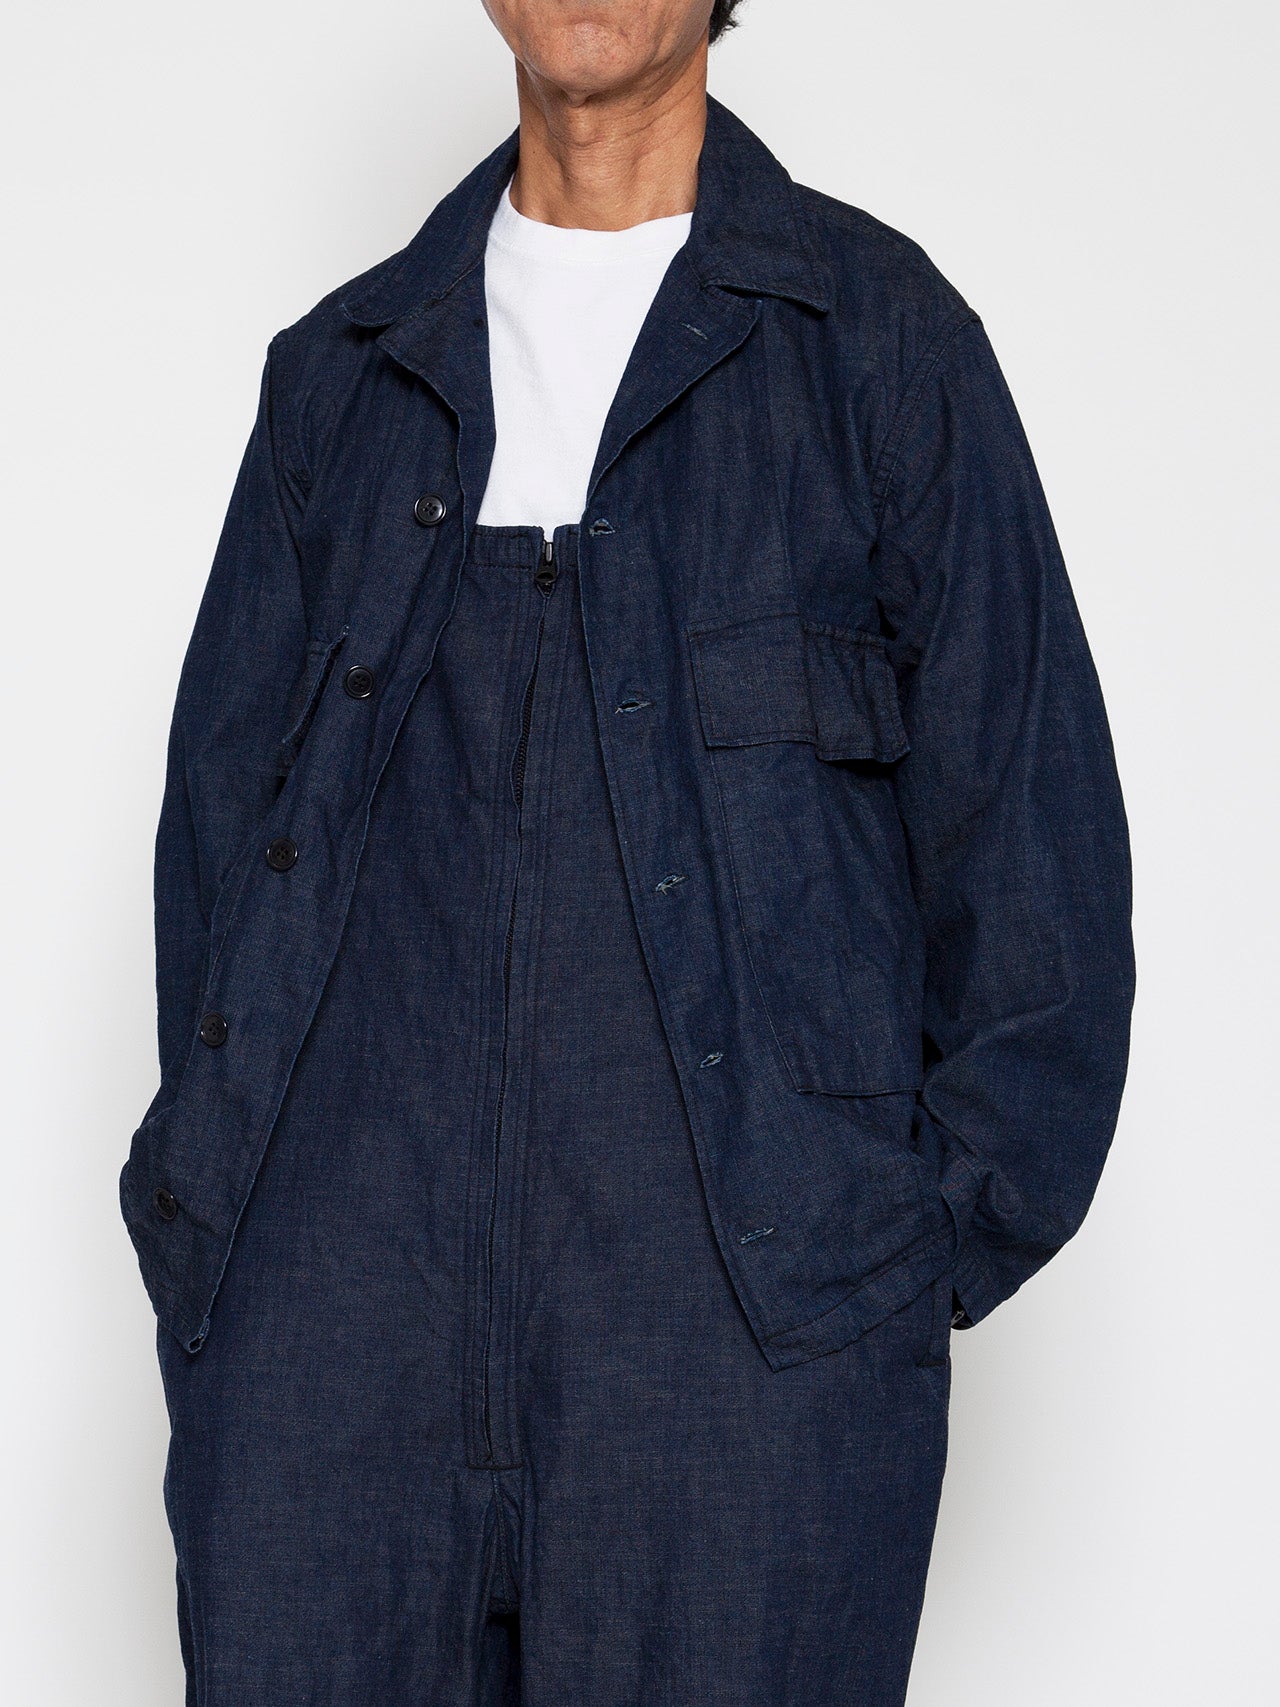 DELIVERY】THE CORONA UTILITY - NAVY UTILITY JAC SHIRT